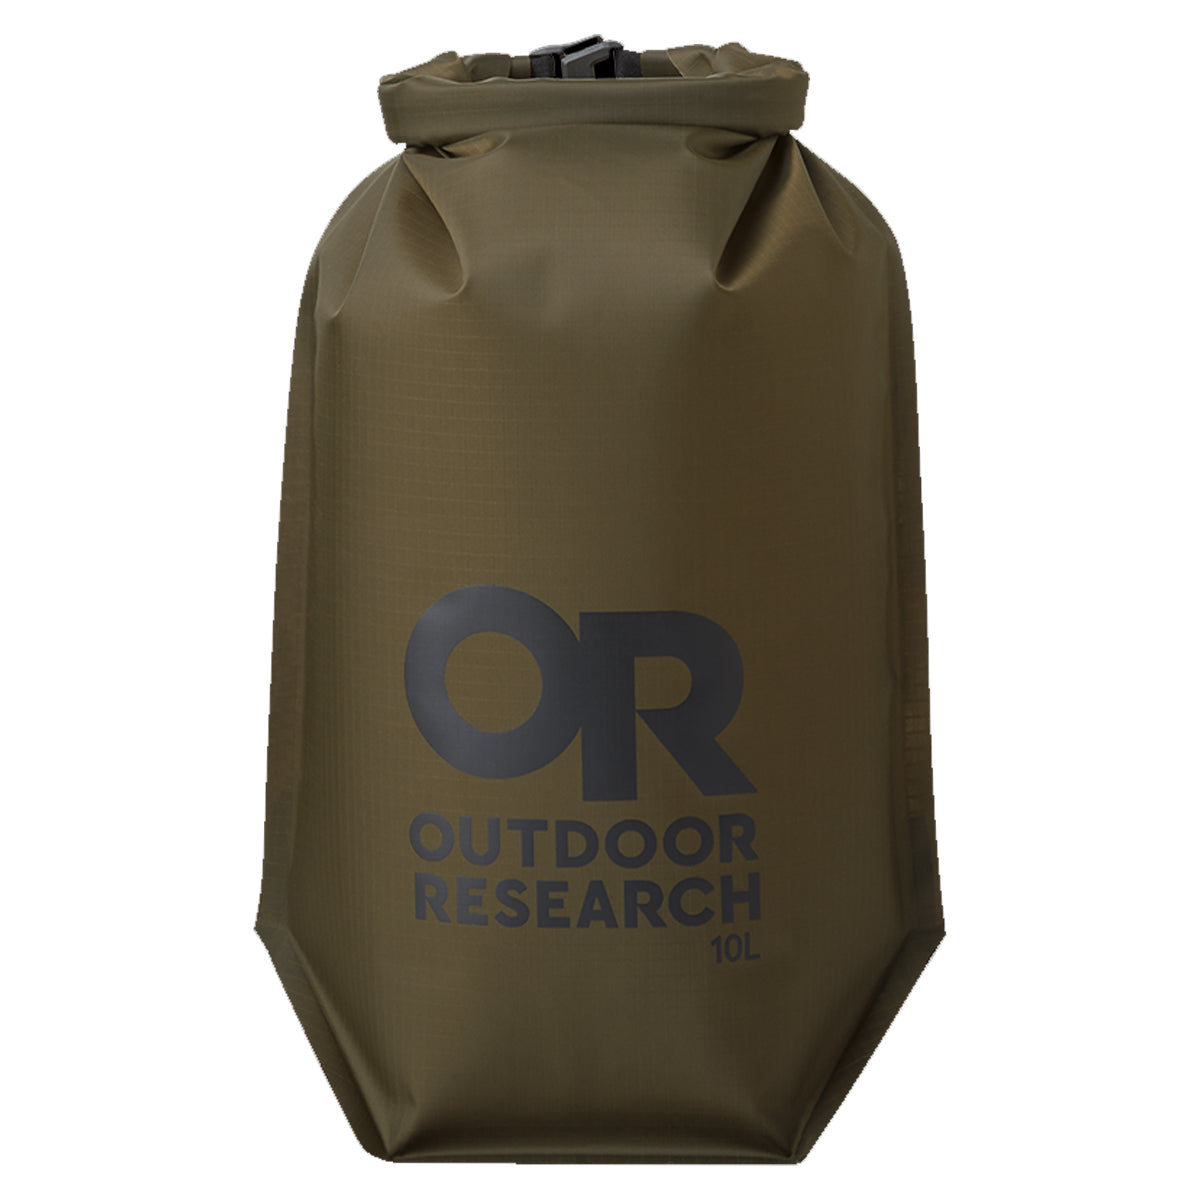 Outdoor Research CarryOut Dry Bag in  by GOHUNT | Outdoor Research - GOHUNT Shop